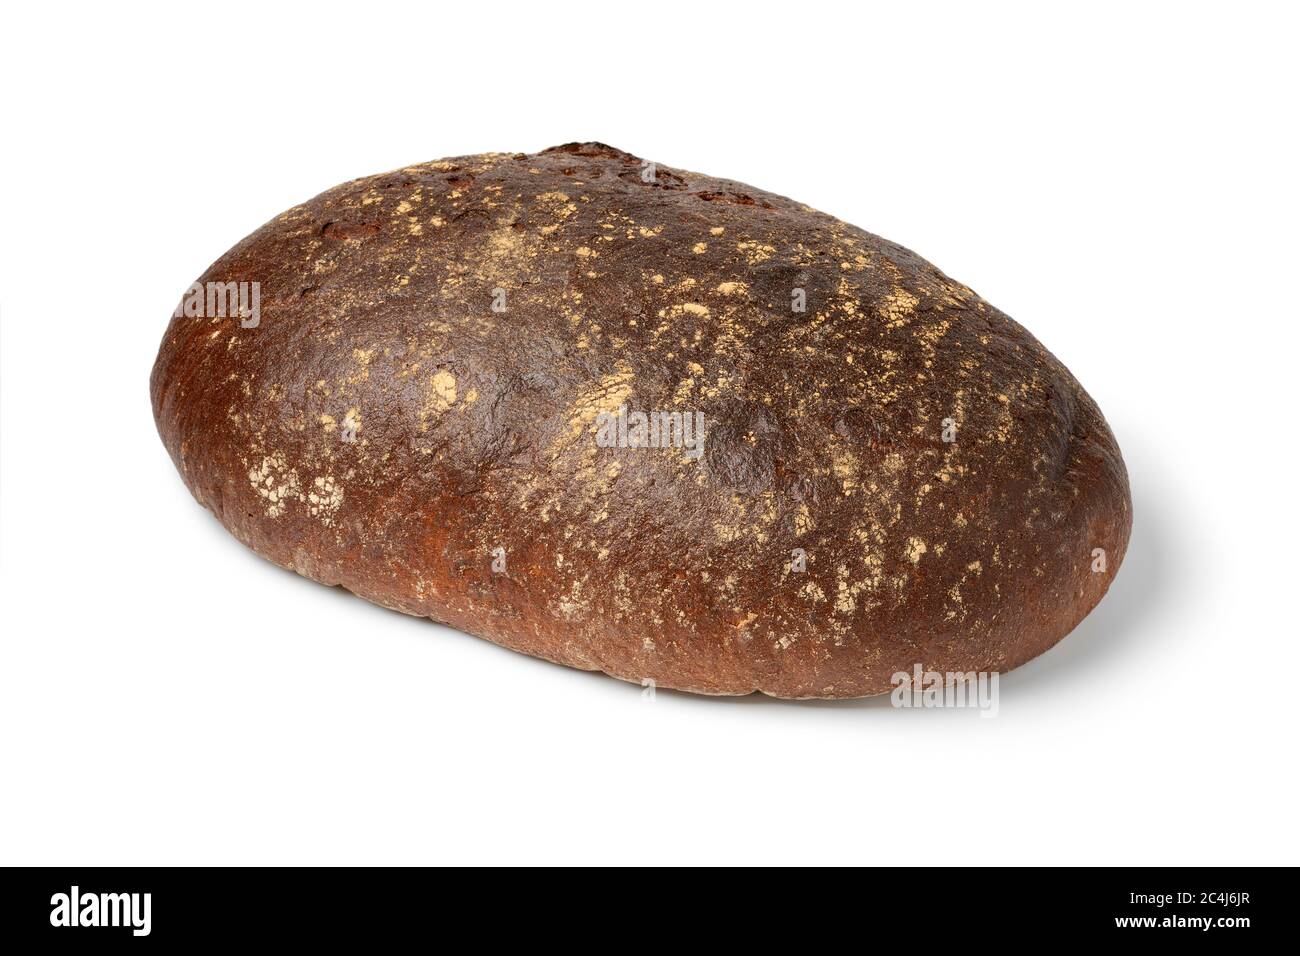 Whole fresh loaf of healthy German Sourdough bread isolated on white background Stock Photo